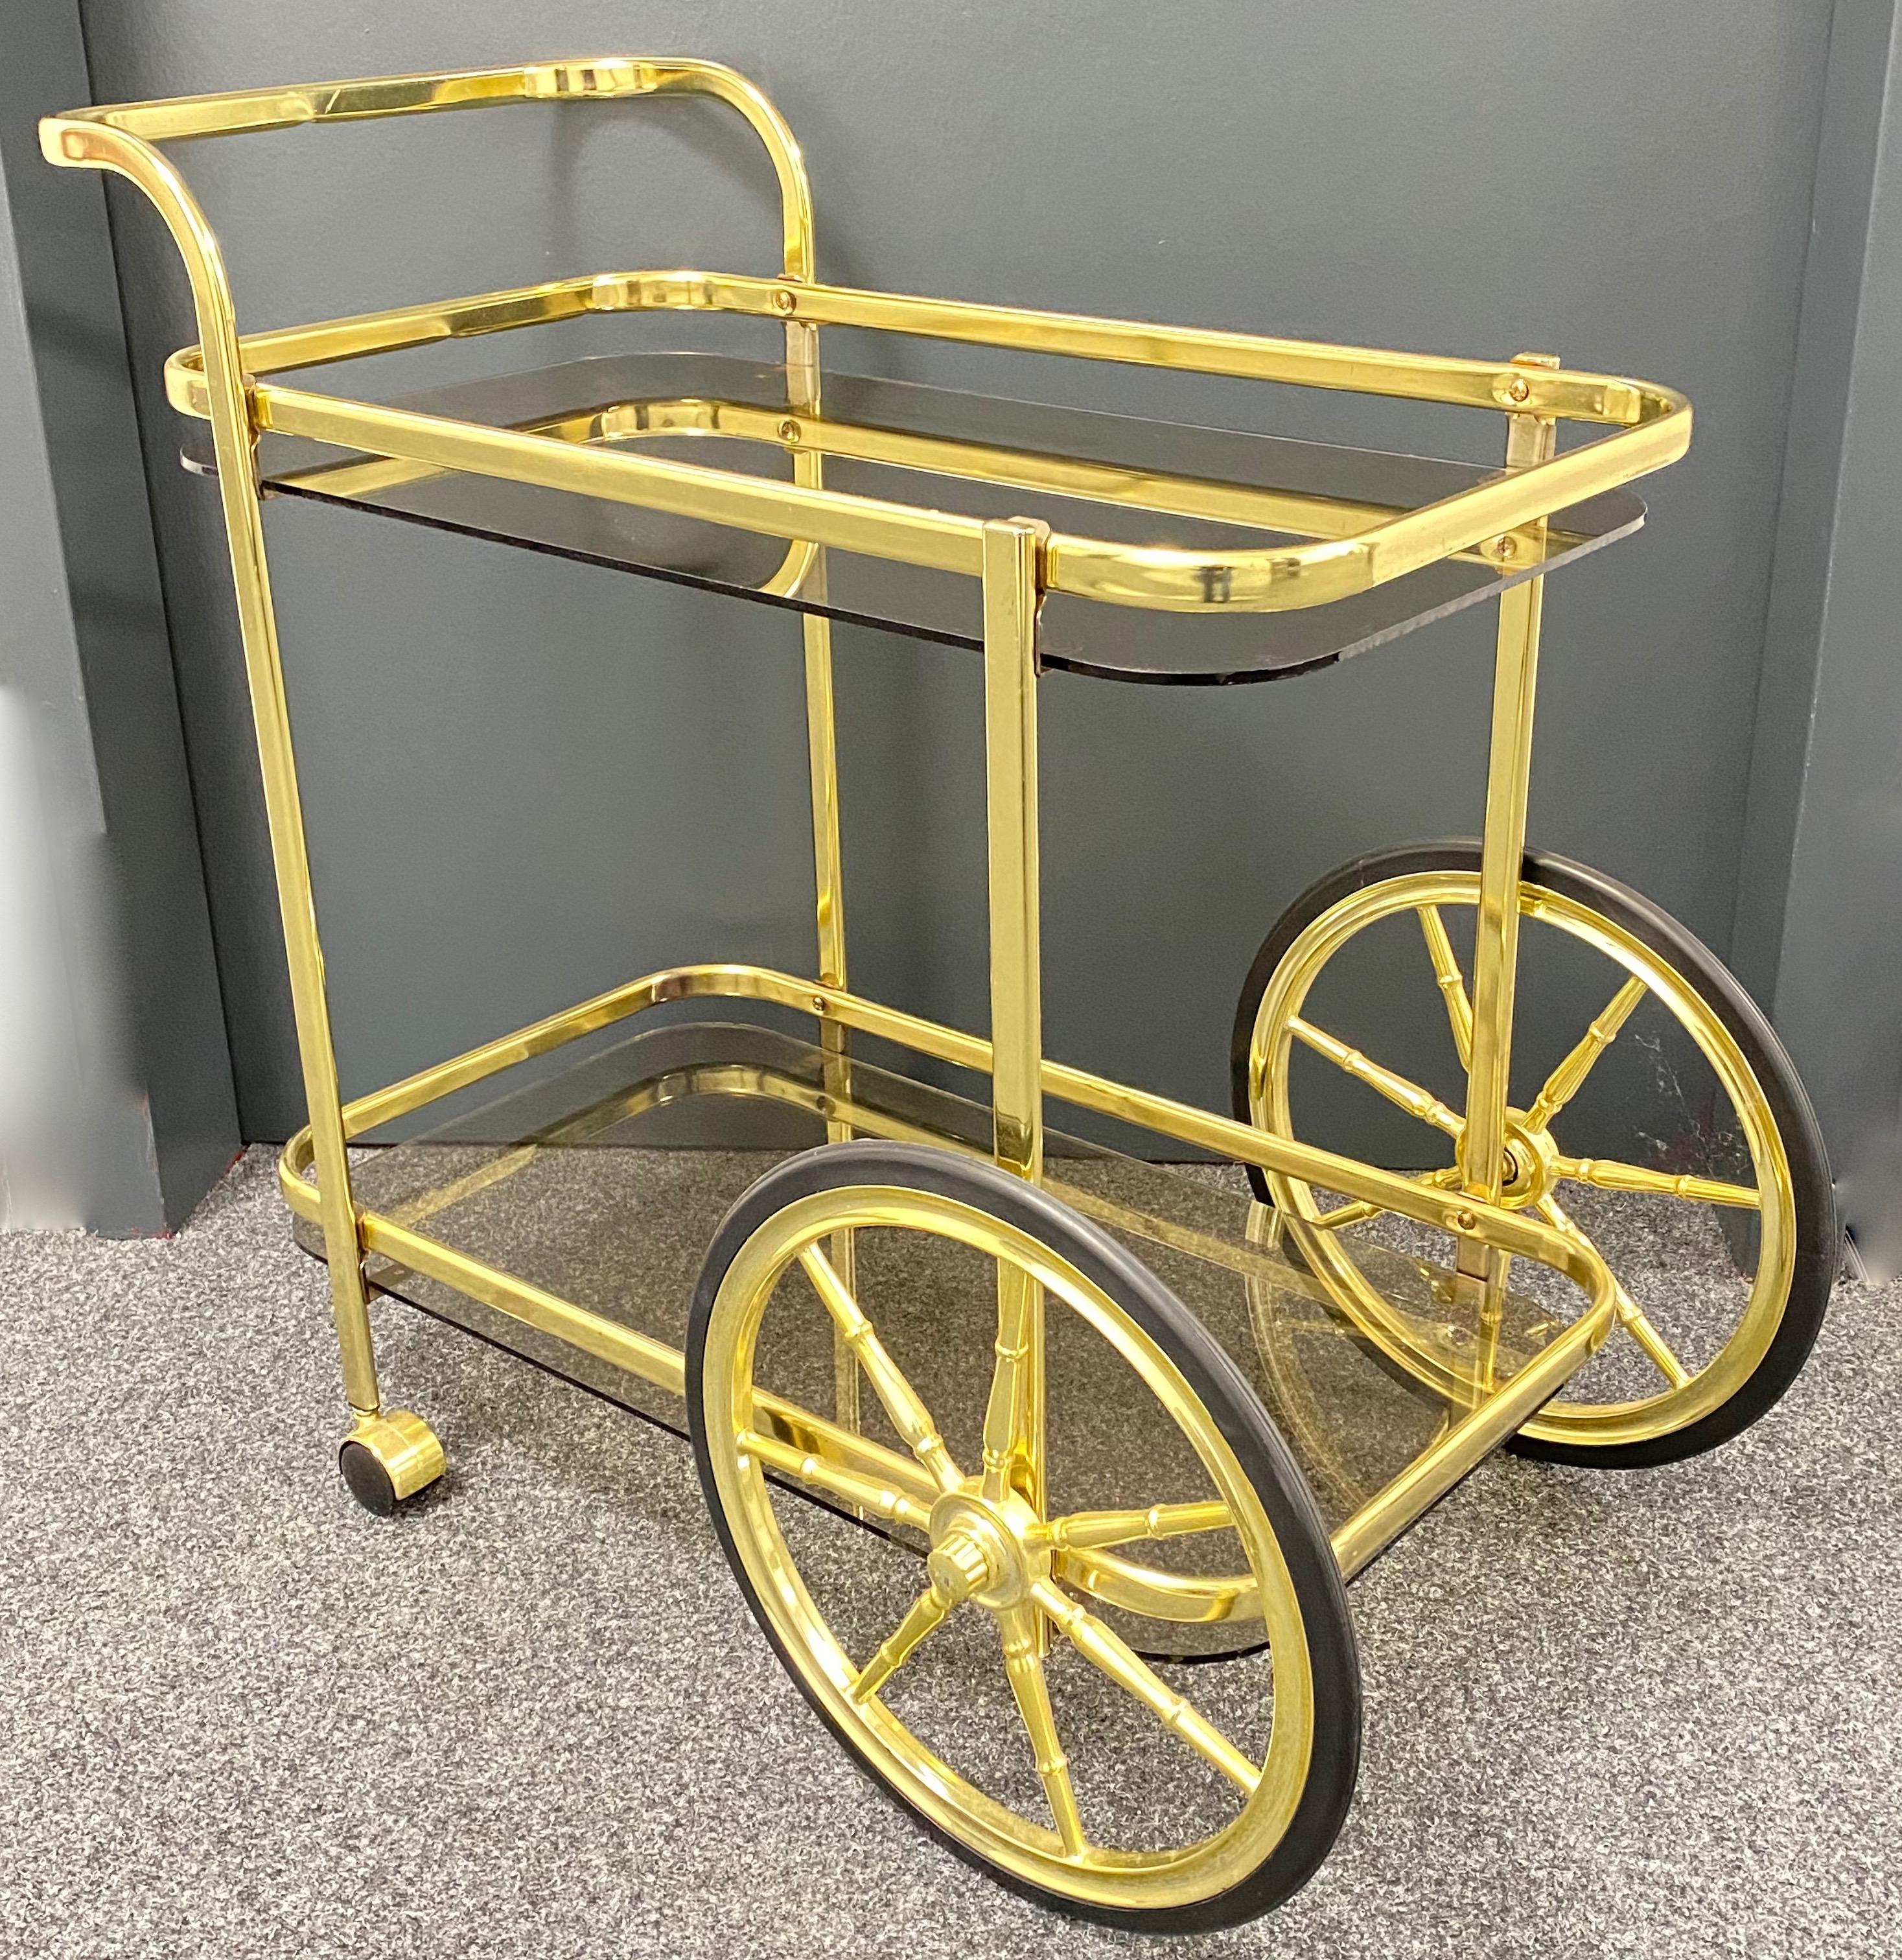 Offered is an absolutely beautiful, 1970s bar cart, tea trolley or drinks stand. Two amber or smoked colored glass plates on a brass (finish) metal frame gives this piece a classy statement. A nice addition to every room or a patio.